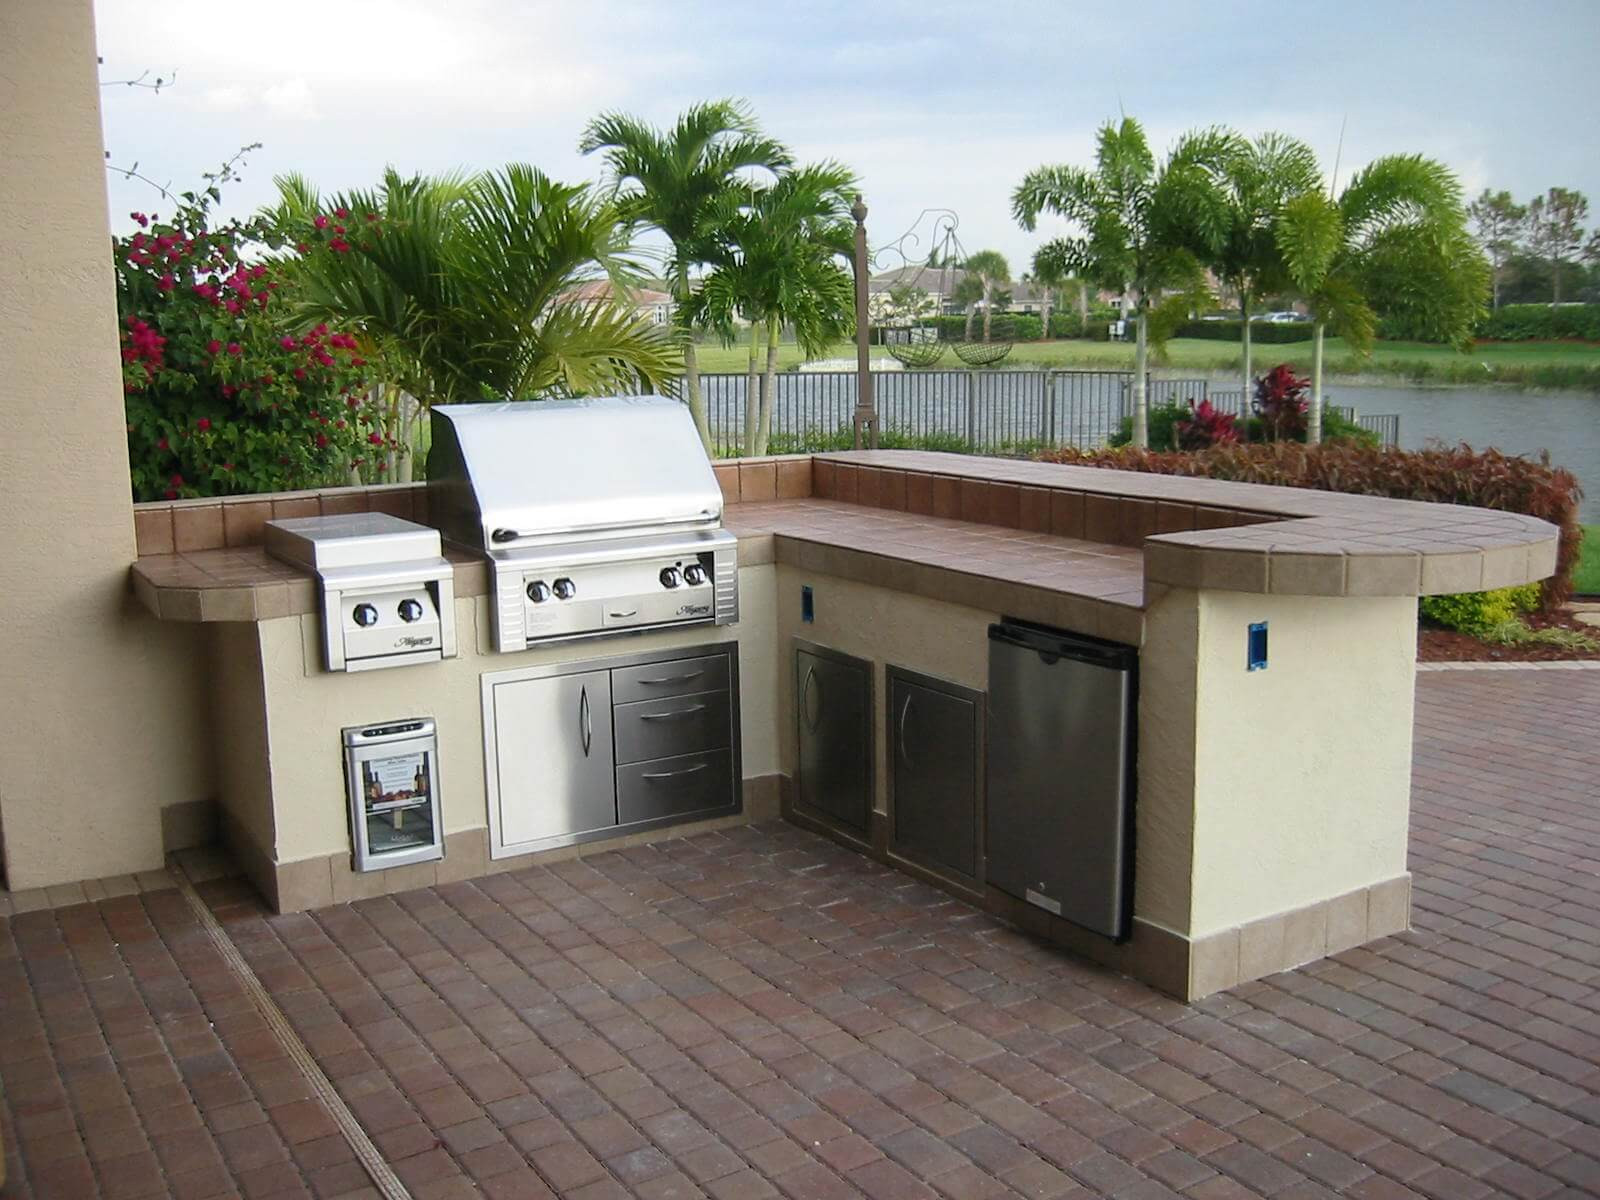 Outdoor Kitchen Kit Lowes
 The Best Reason to Choose Prefabricated Outdoor Kitchen